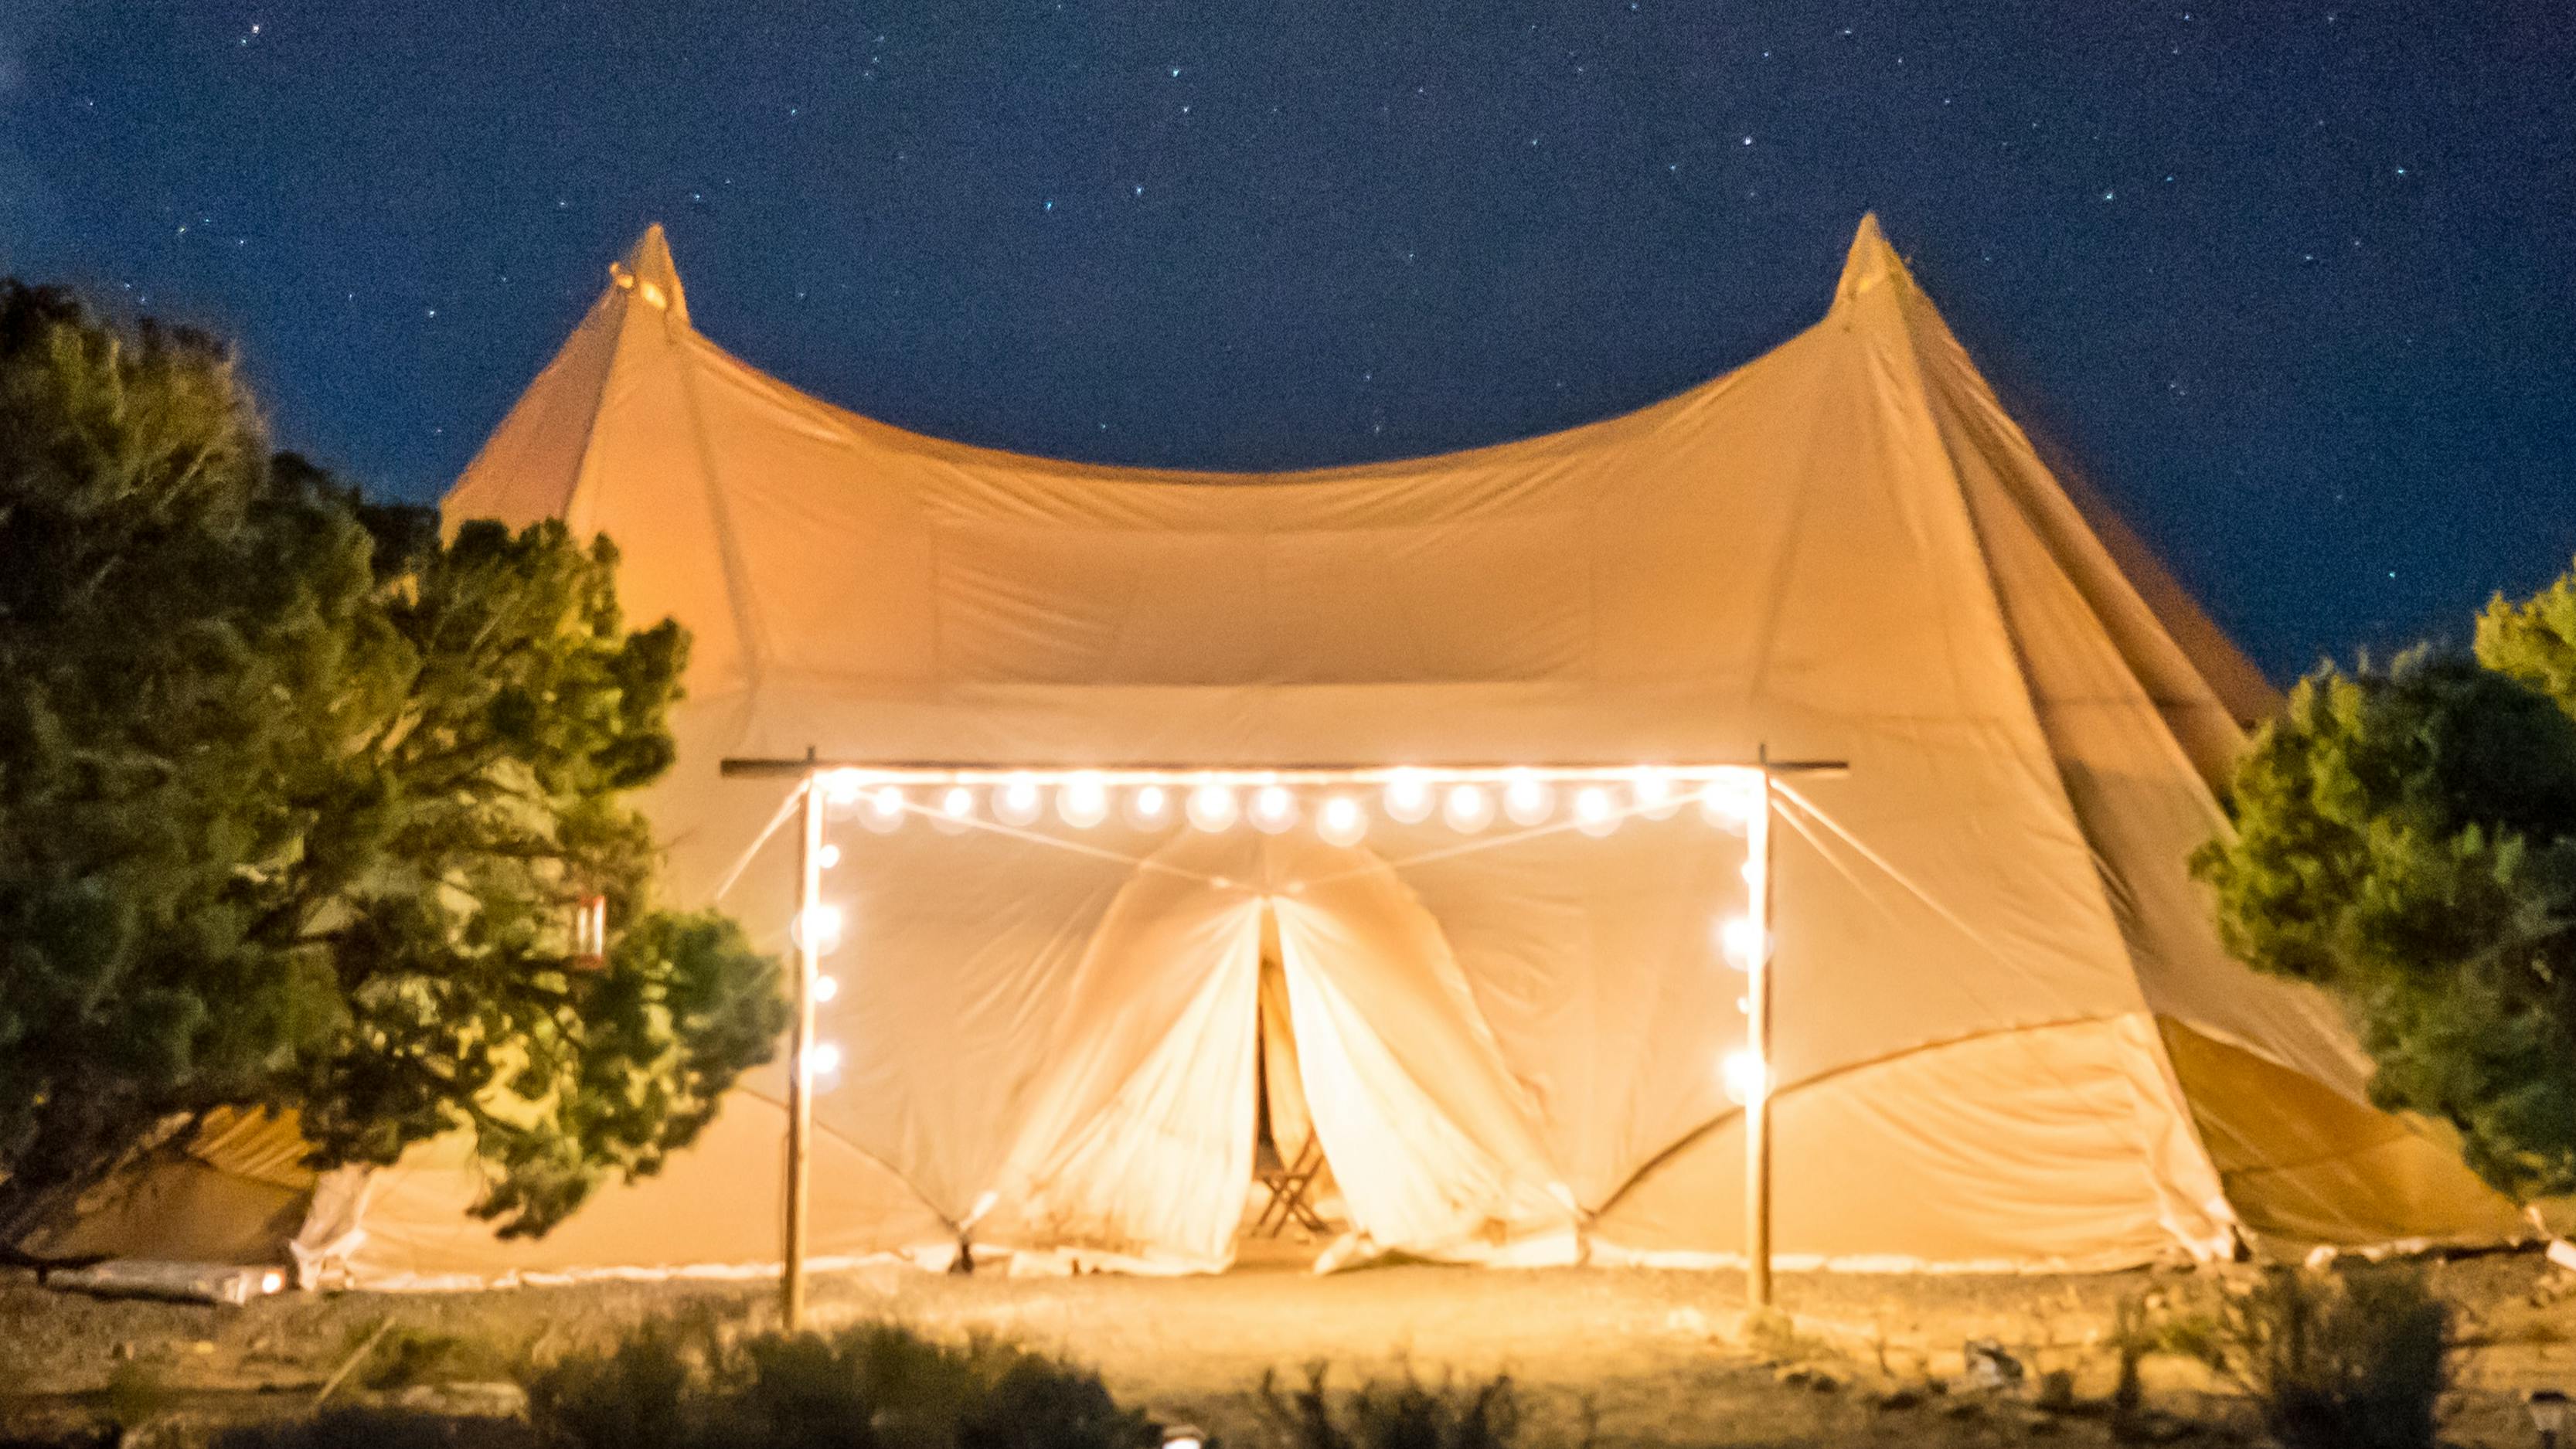 A large white tent is illuminated by a frame of lights. The night sky in the background is full of stars.